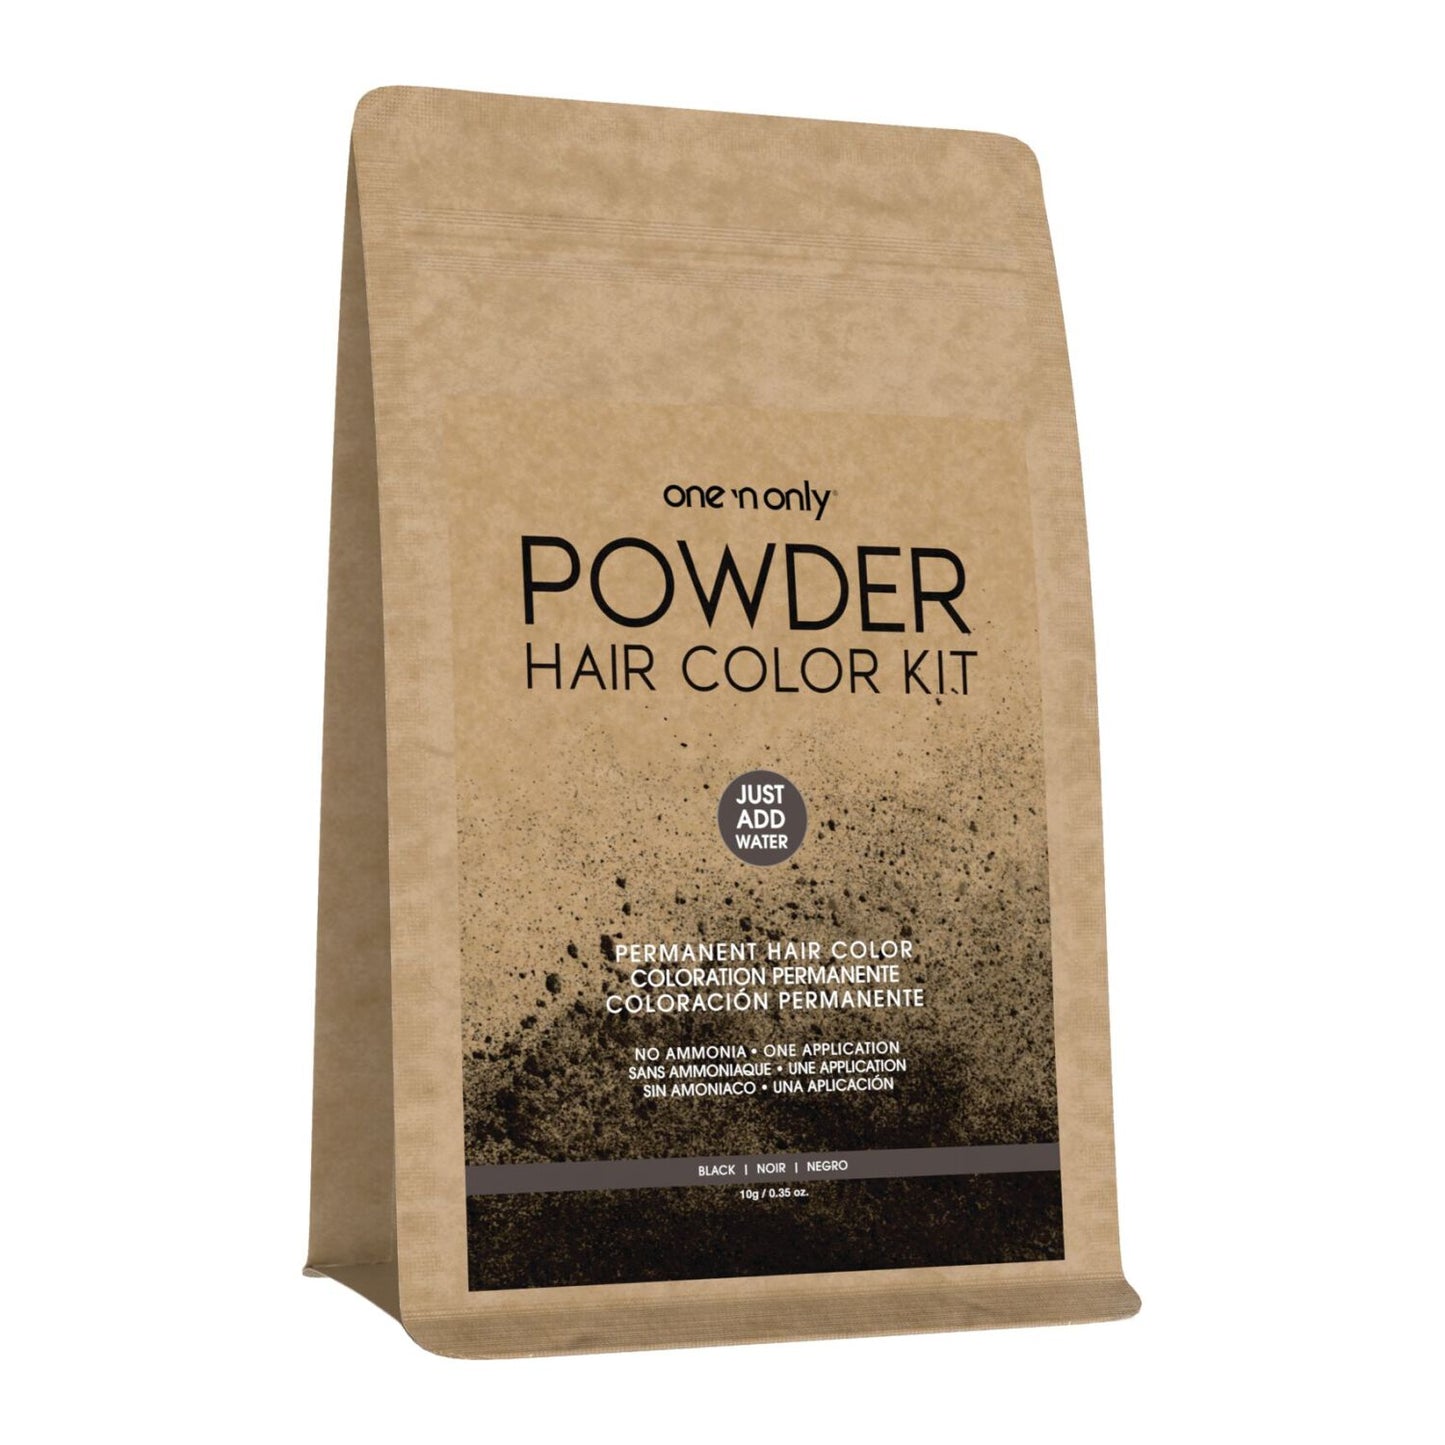 Powder Hair Color  by   One 'n Only Powder Permanent Hair Color Kit Black